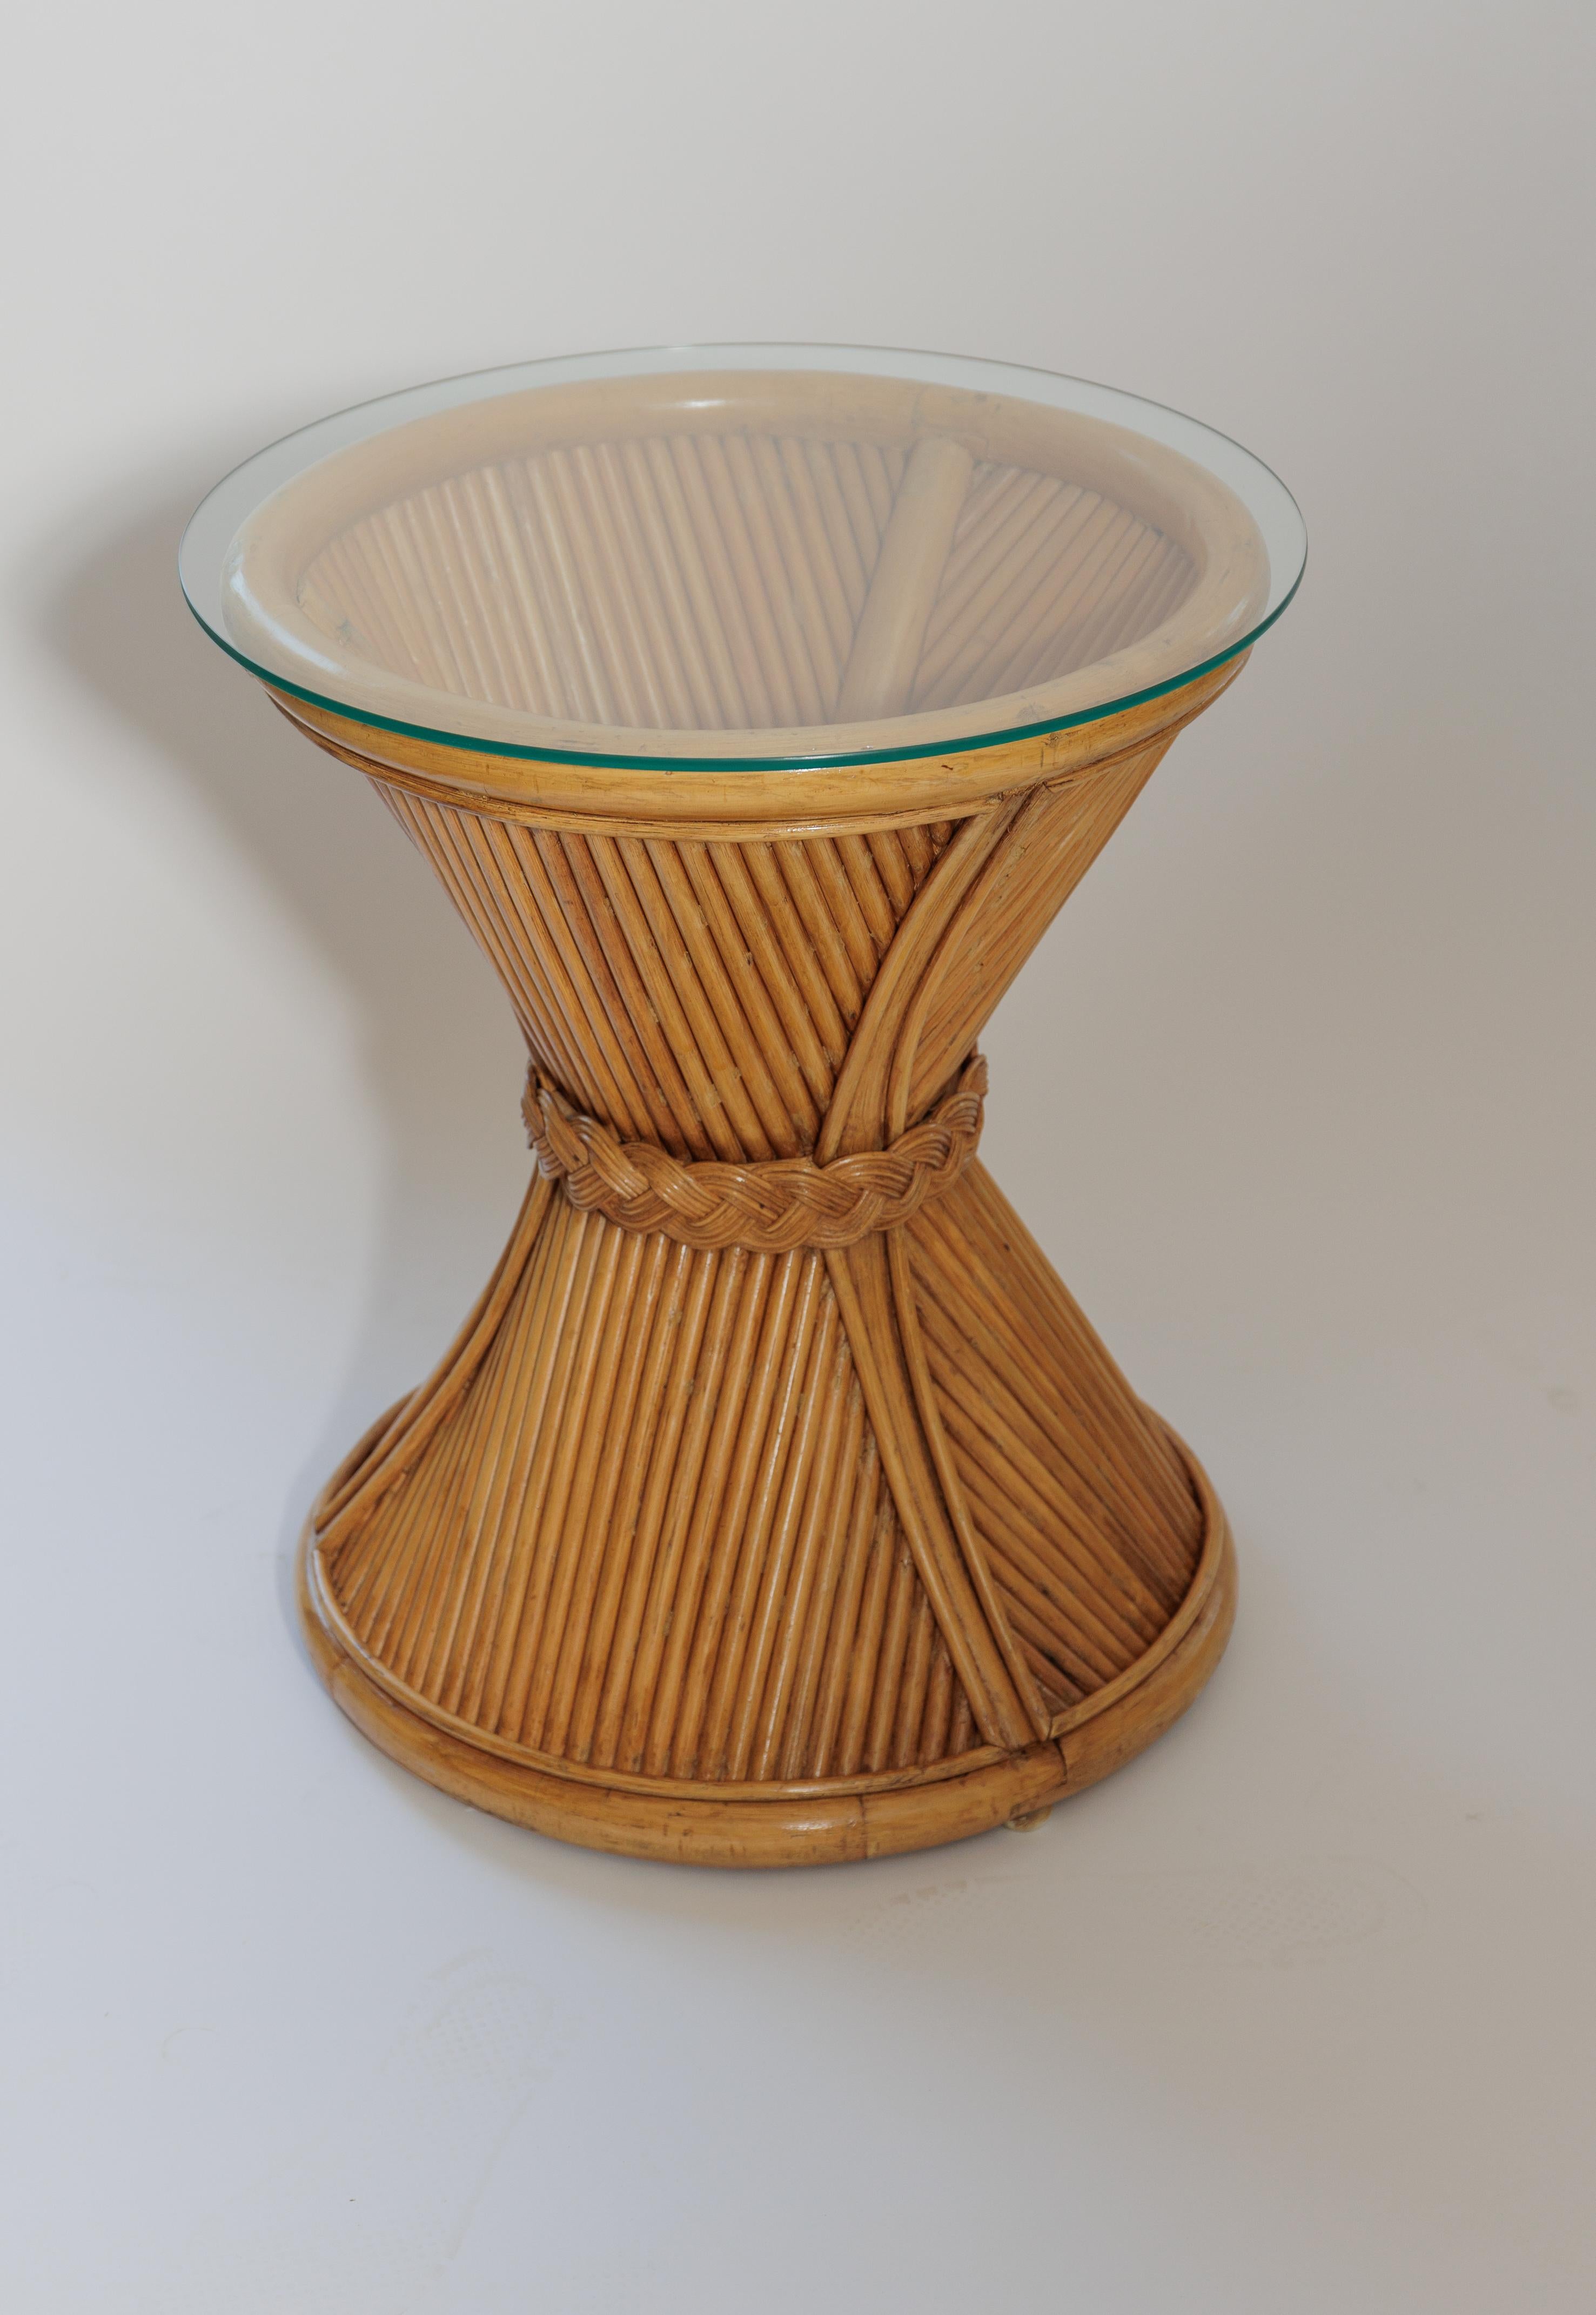 Pair of bamboo side tables with glass tops.  Featuring fluting and braid detailing.